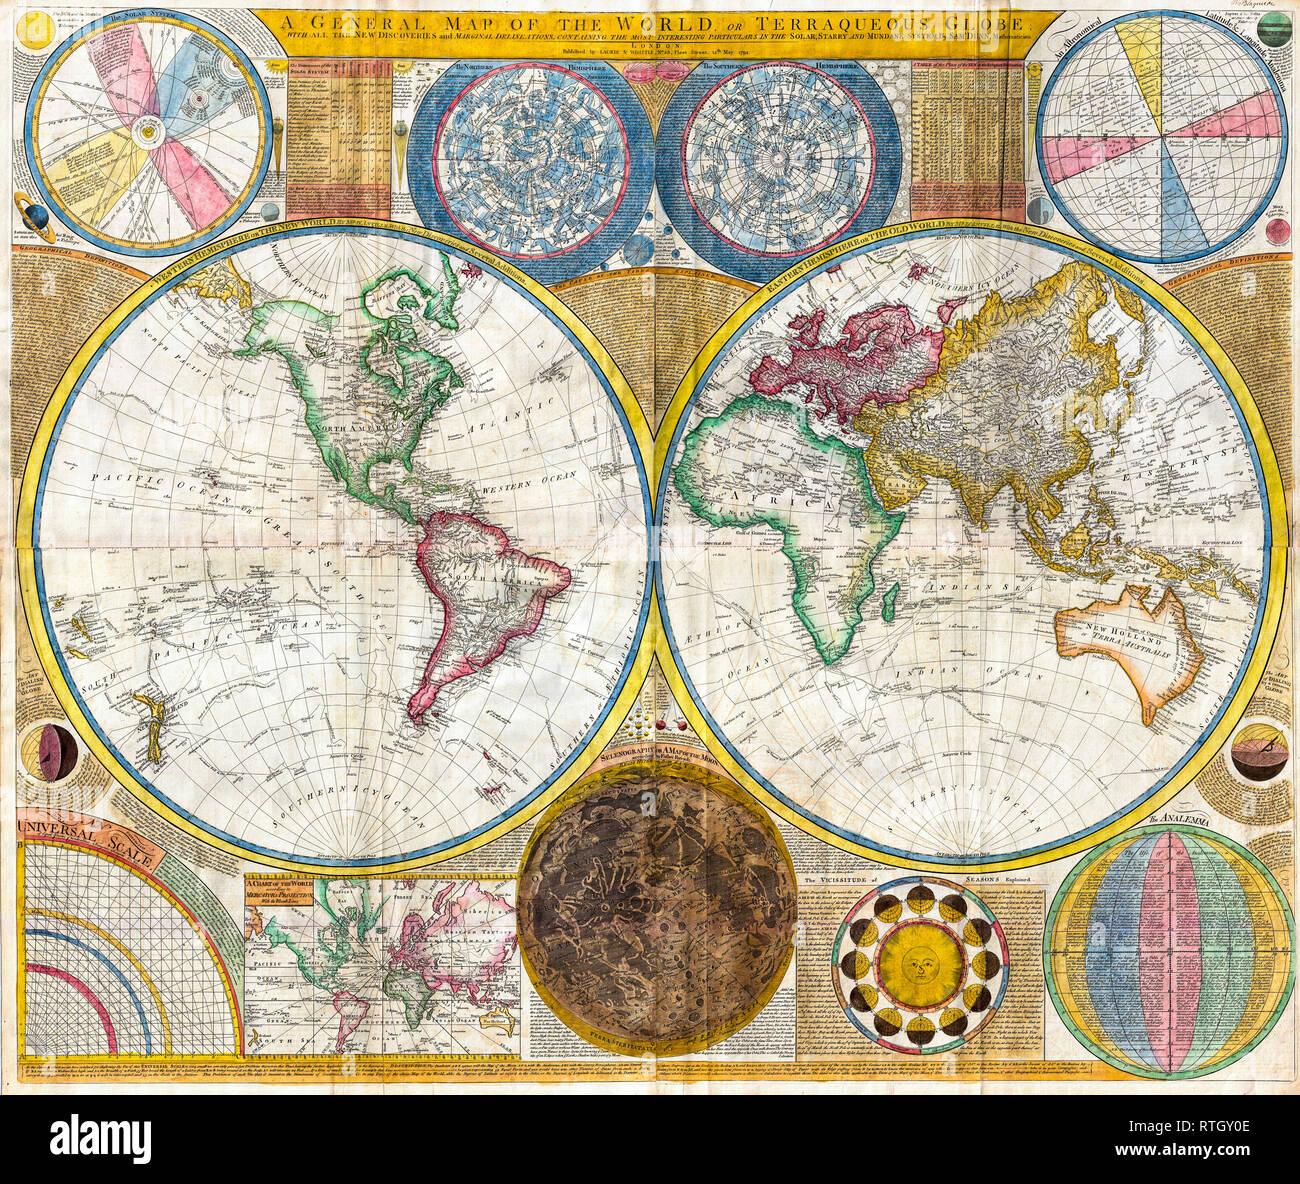 Old World Map - Wall Map of the World in Hemispheres, 1794 Stock Photo